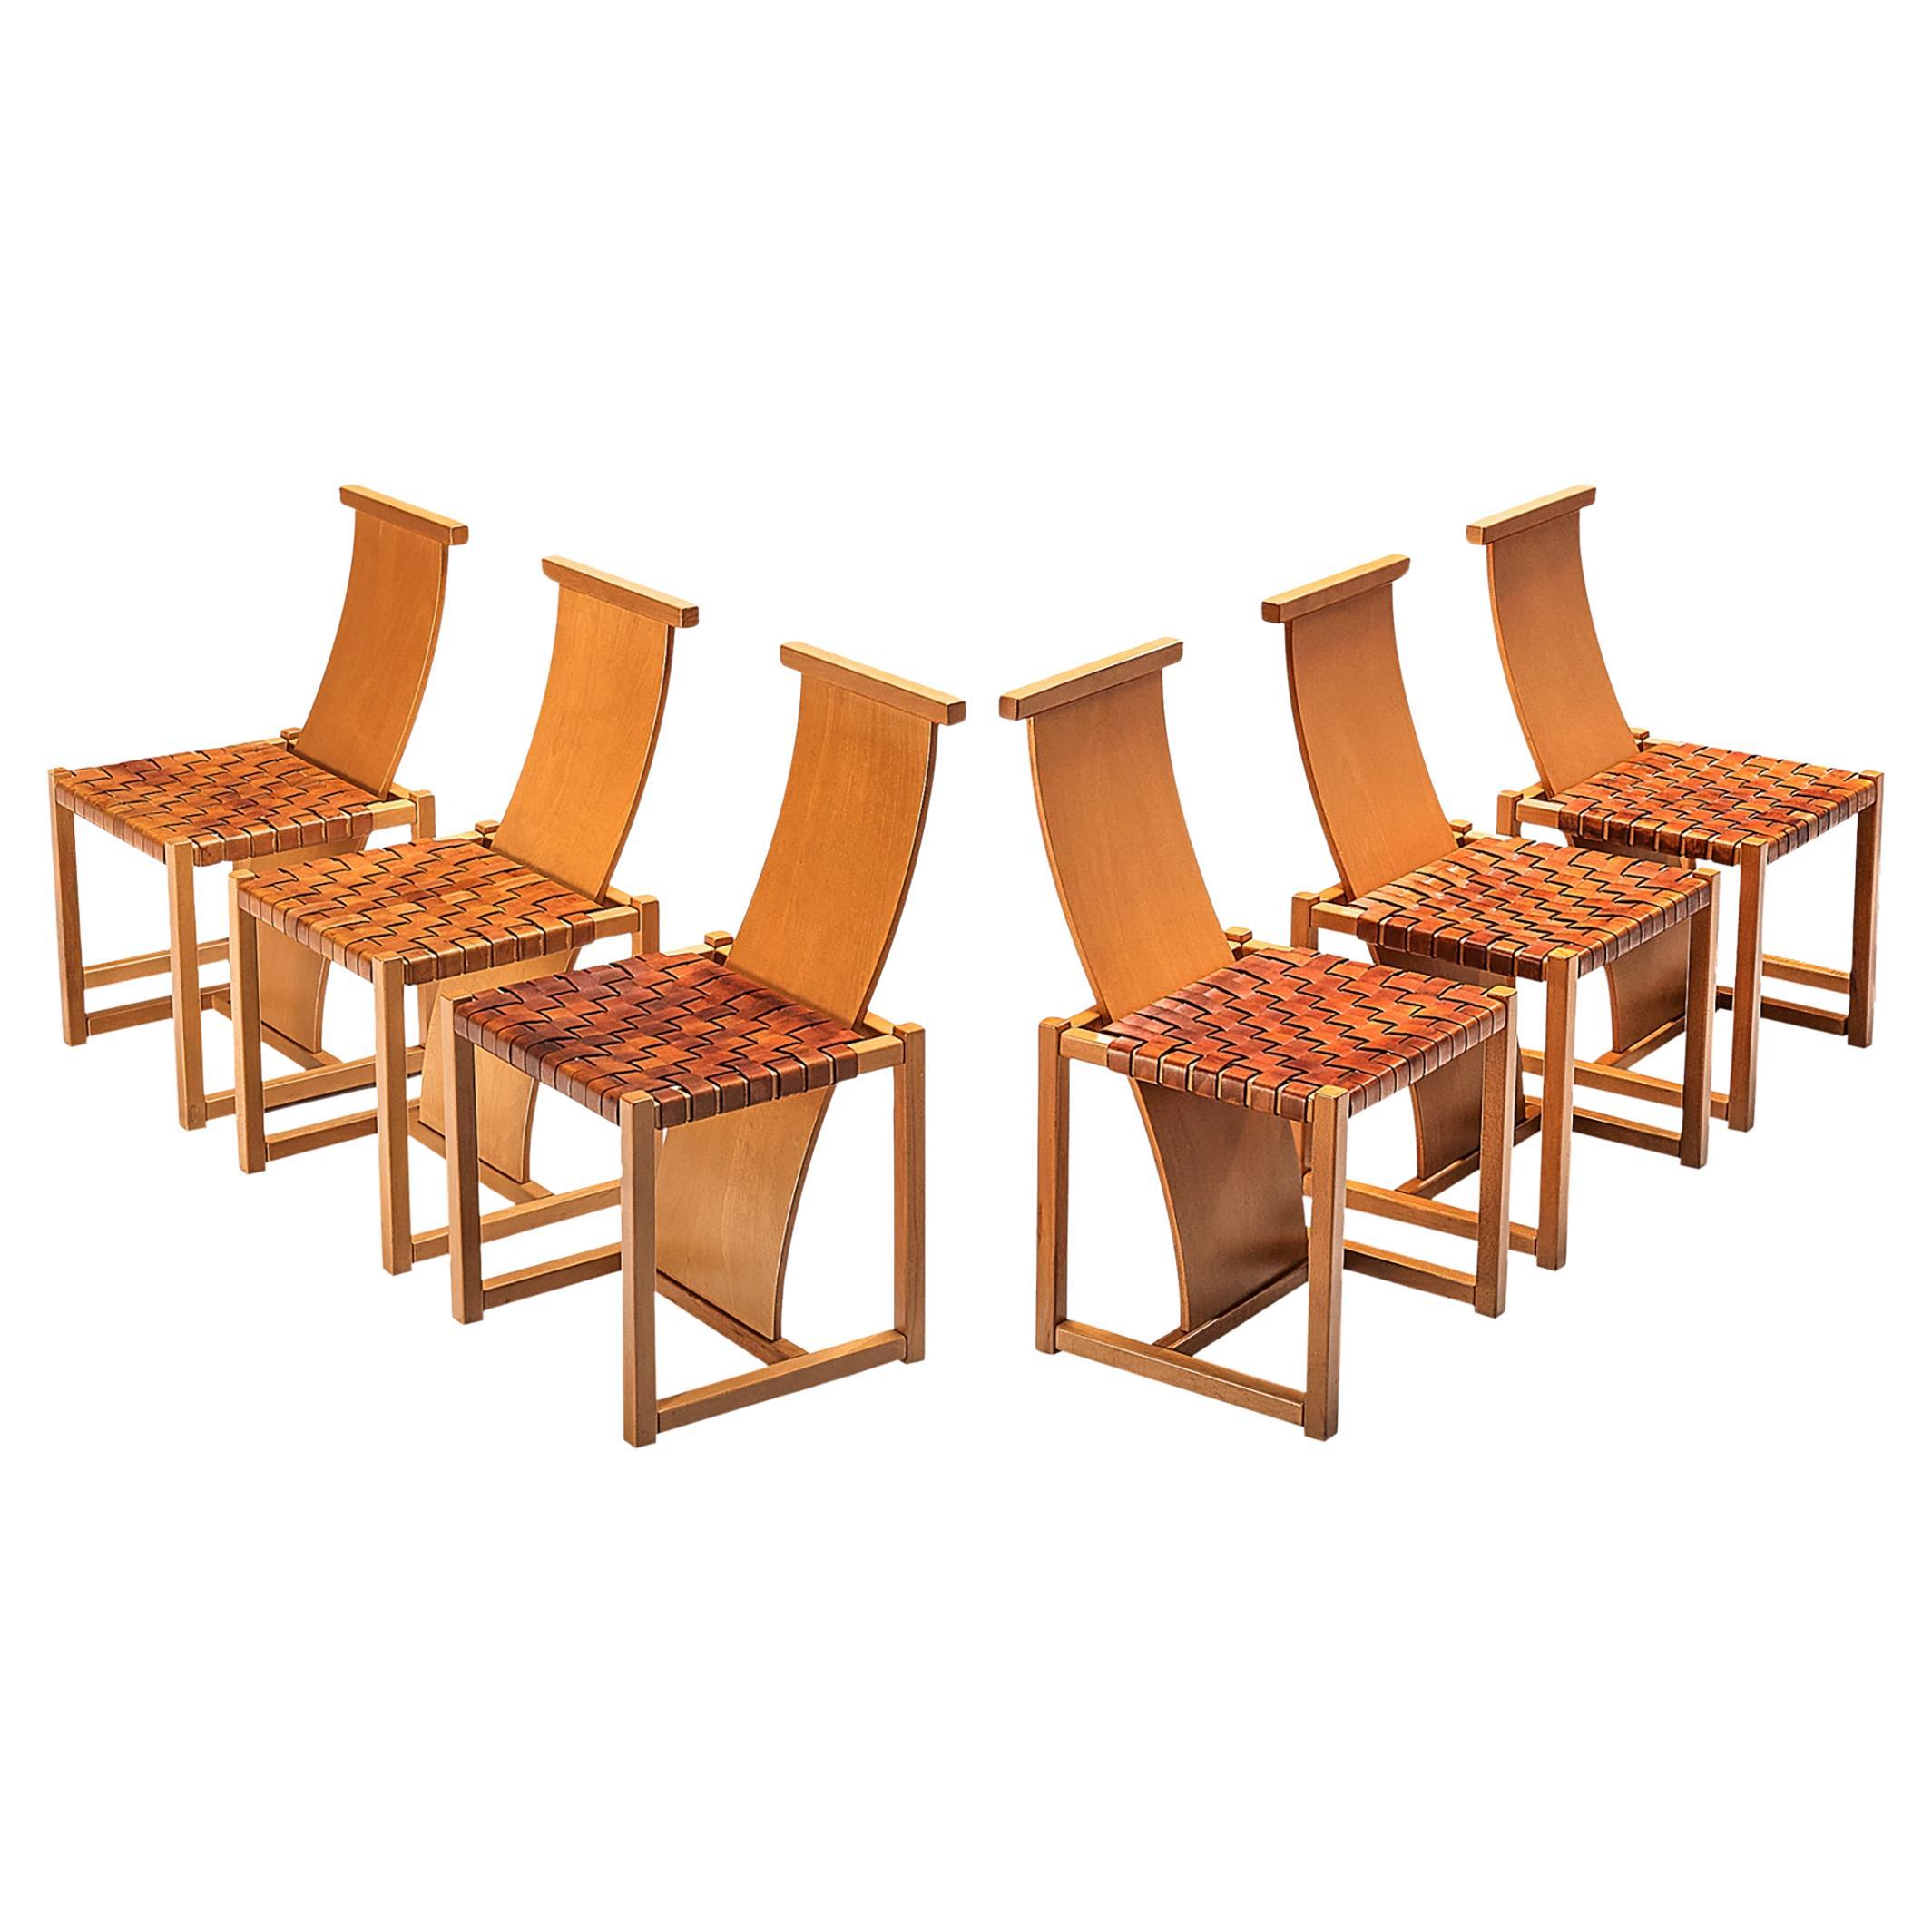 What is a good width for a dining chair?